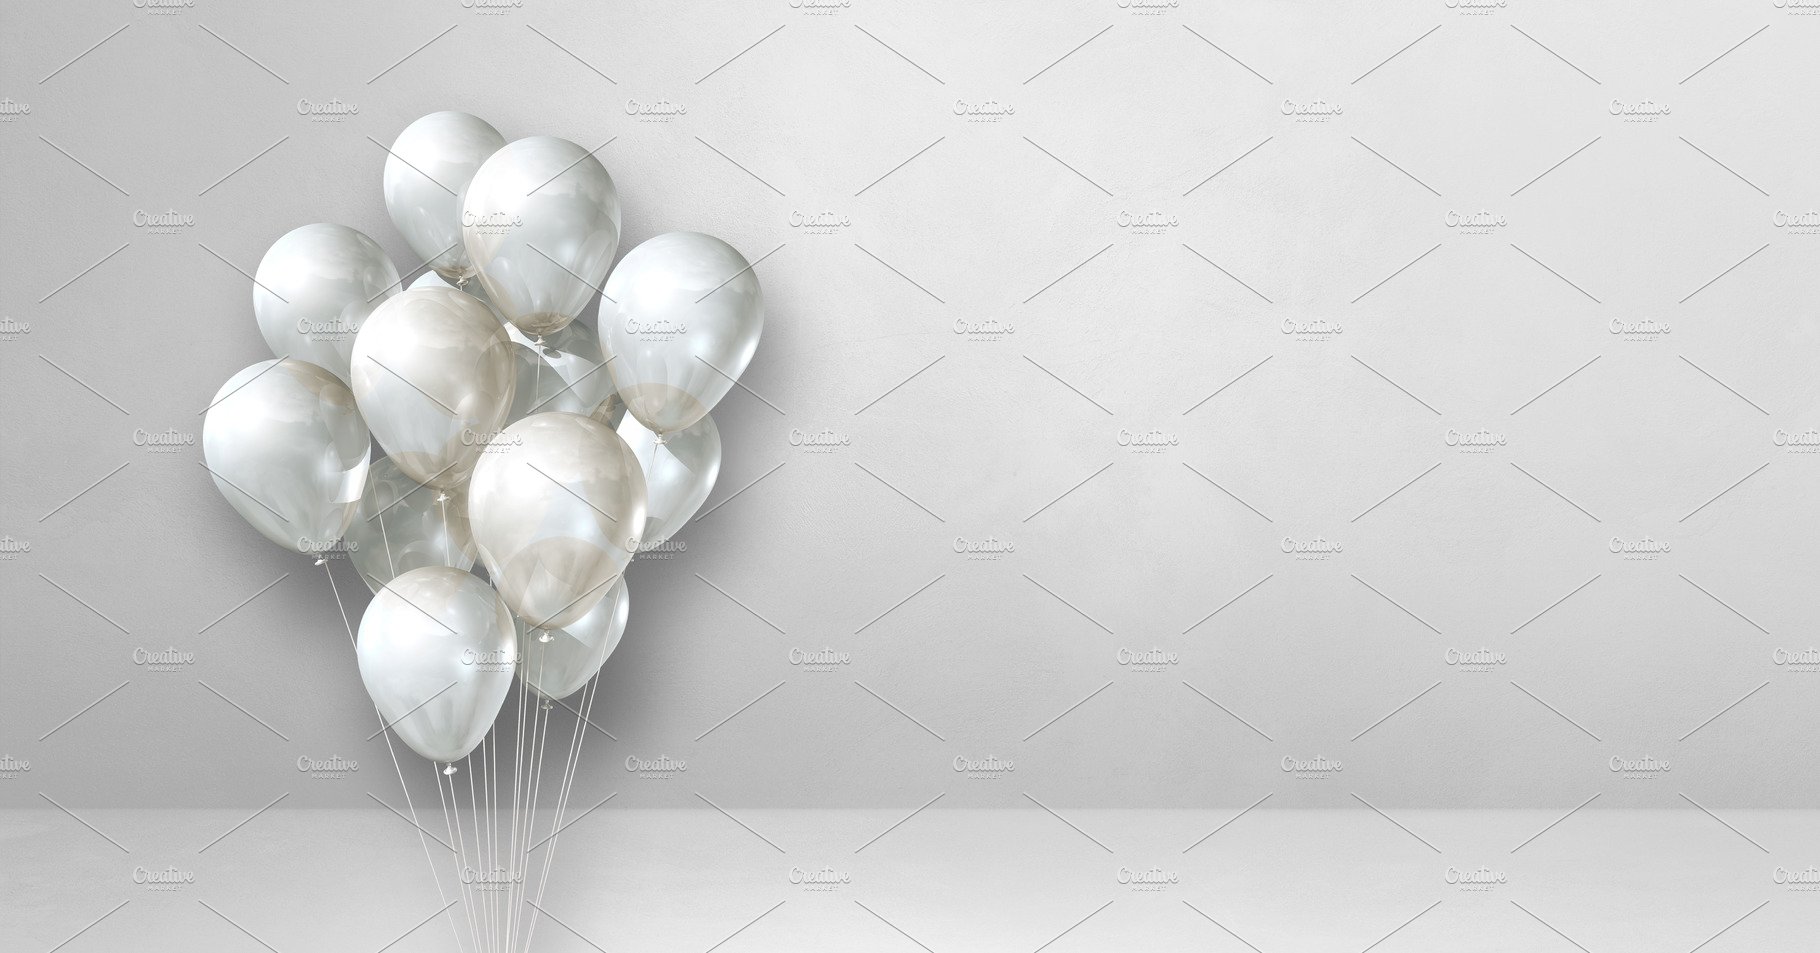 Balloons bunch on a white wall background. Horizontal banner. cover image.